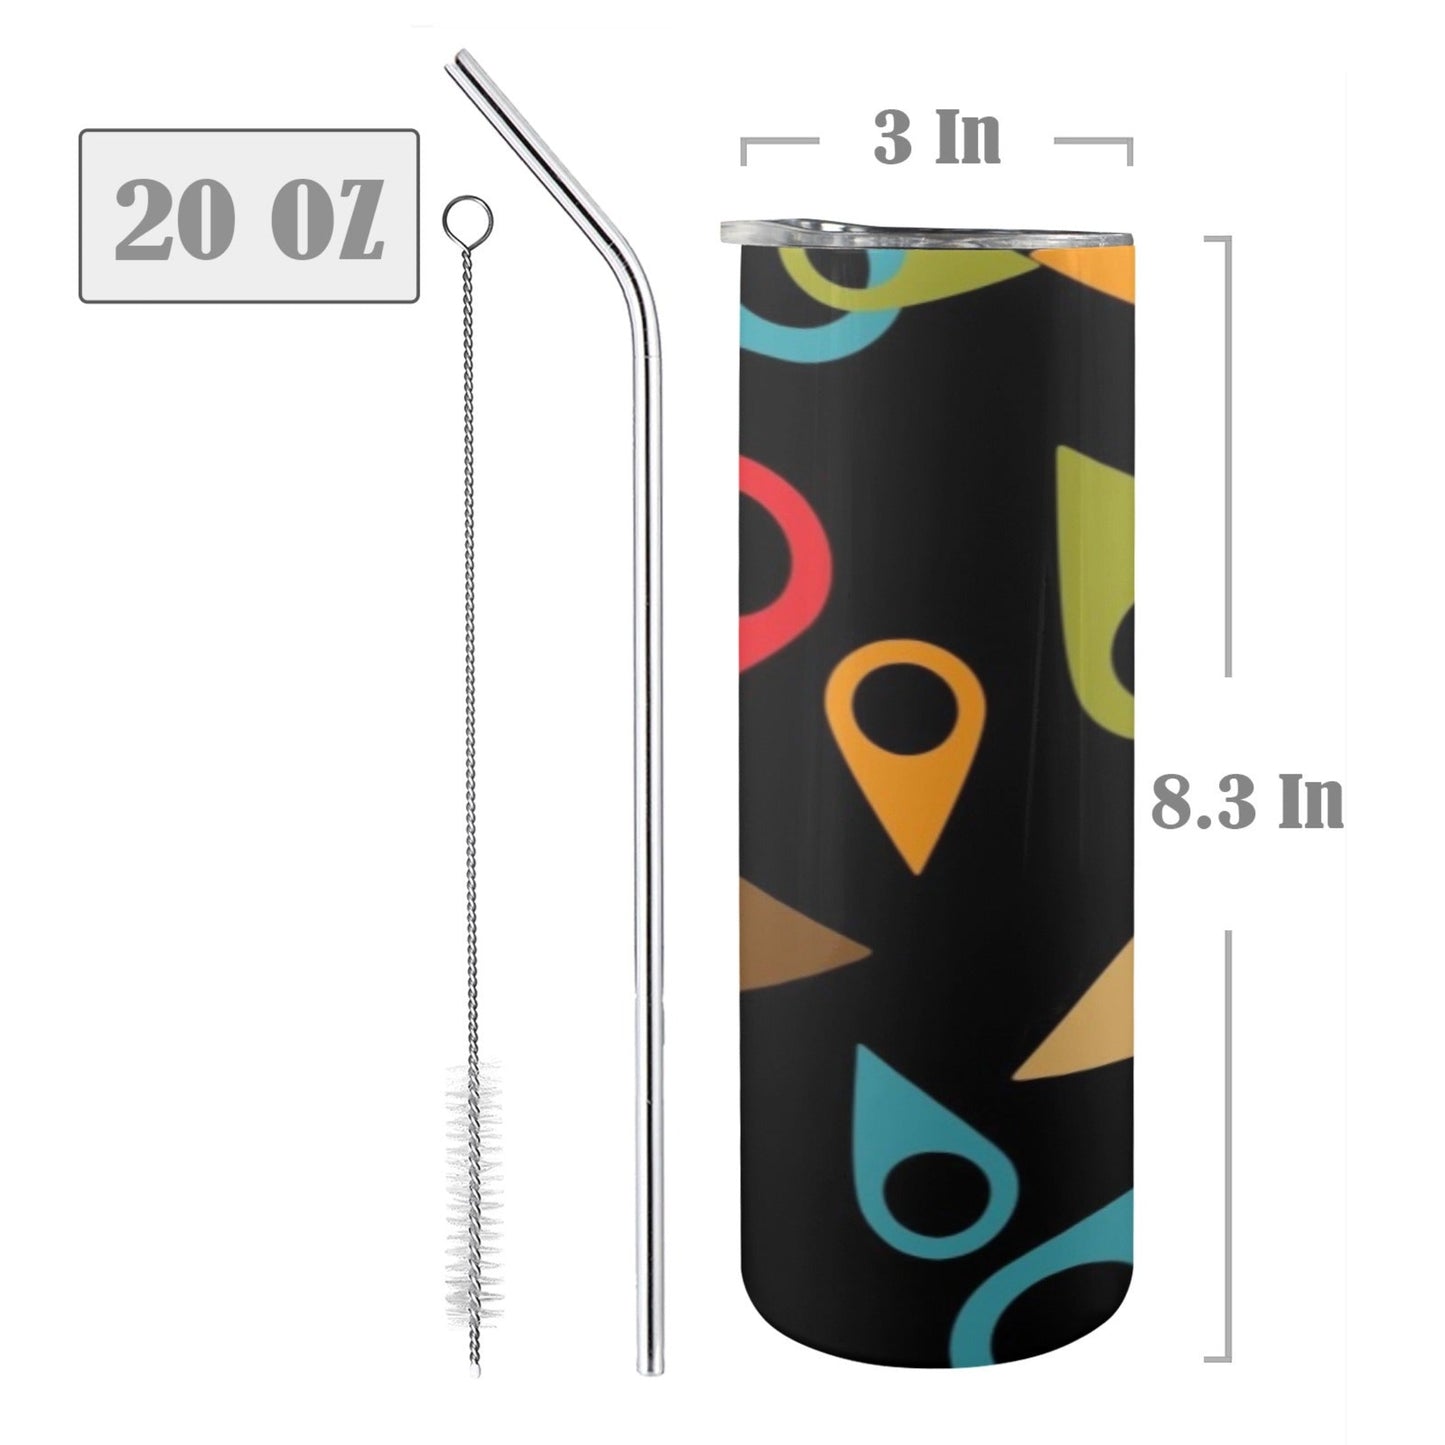 Where Am I - 20oz Tall Skinny Tumbler with Lid and Straw 20oz Tall Skinny Tumbler with Lid and Straw